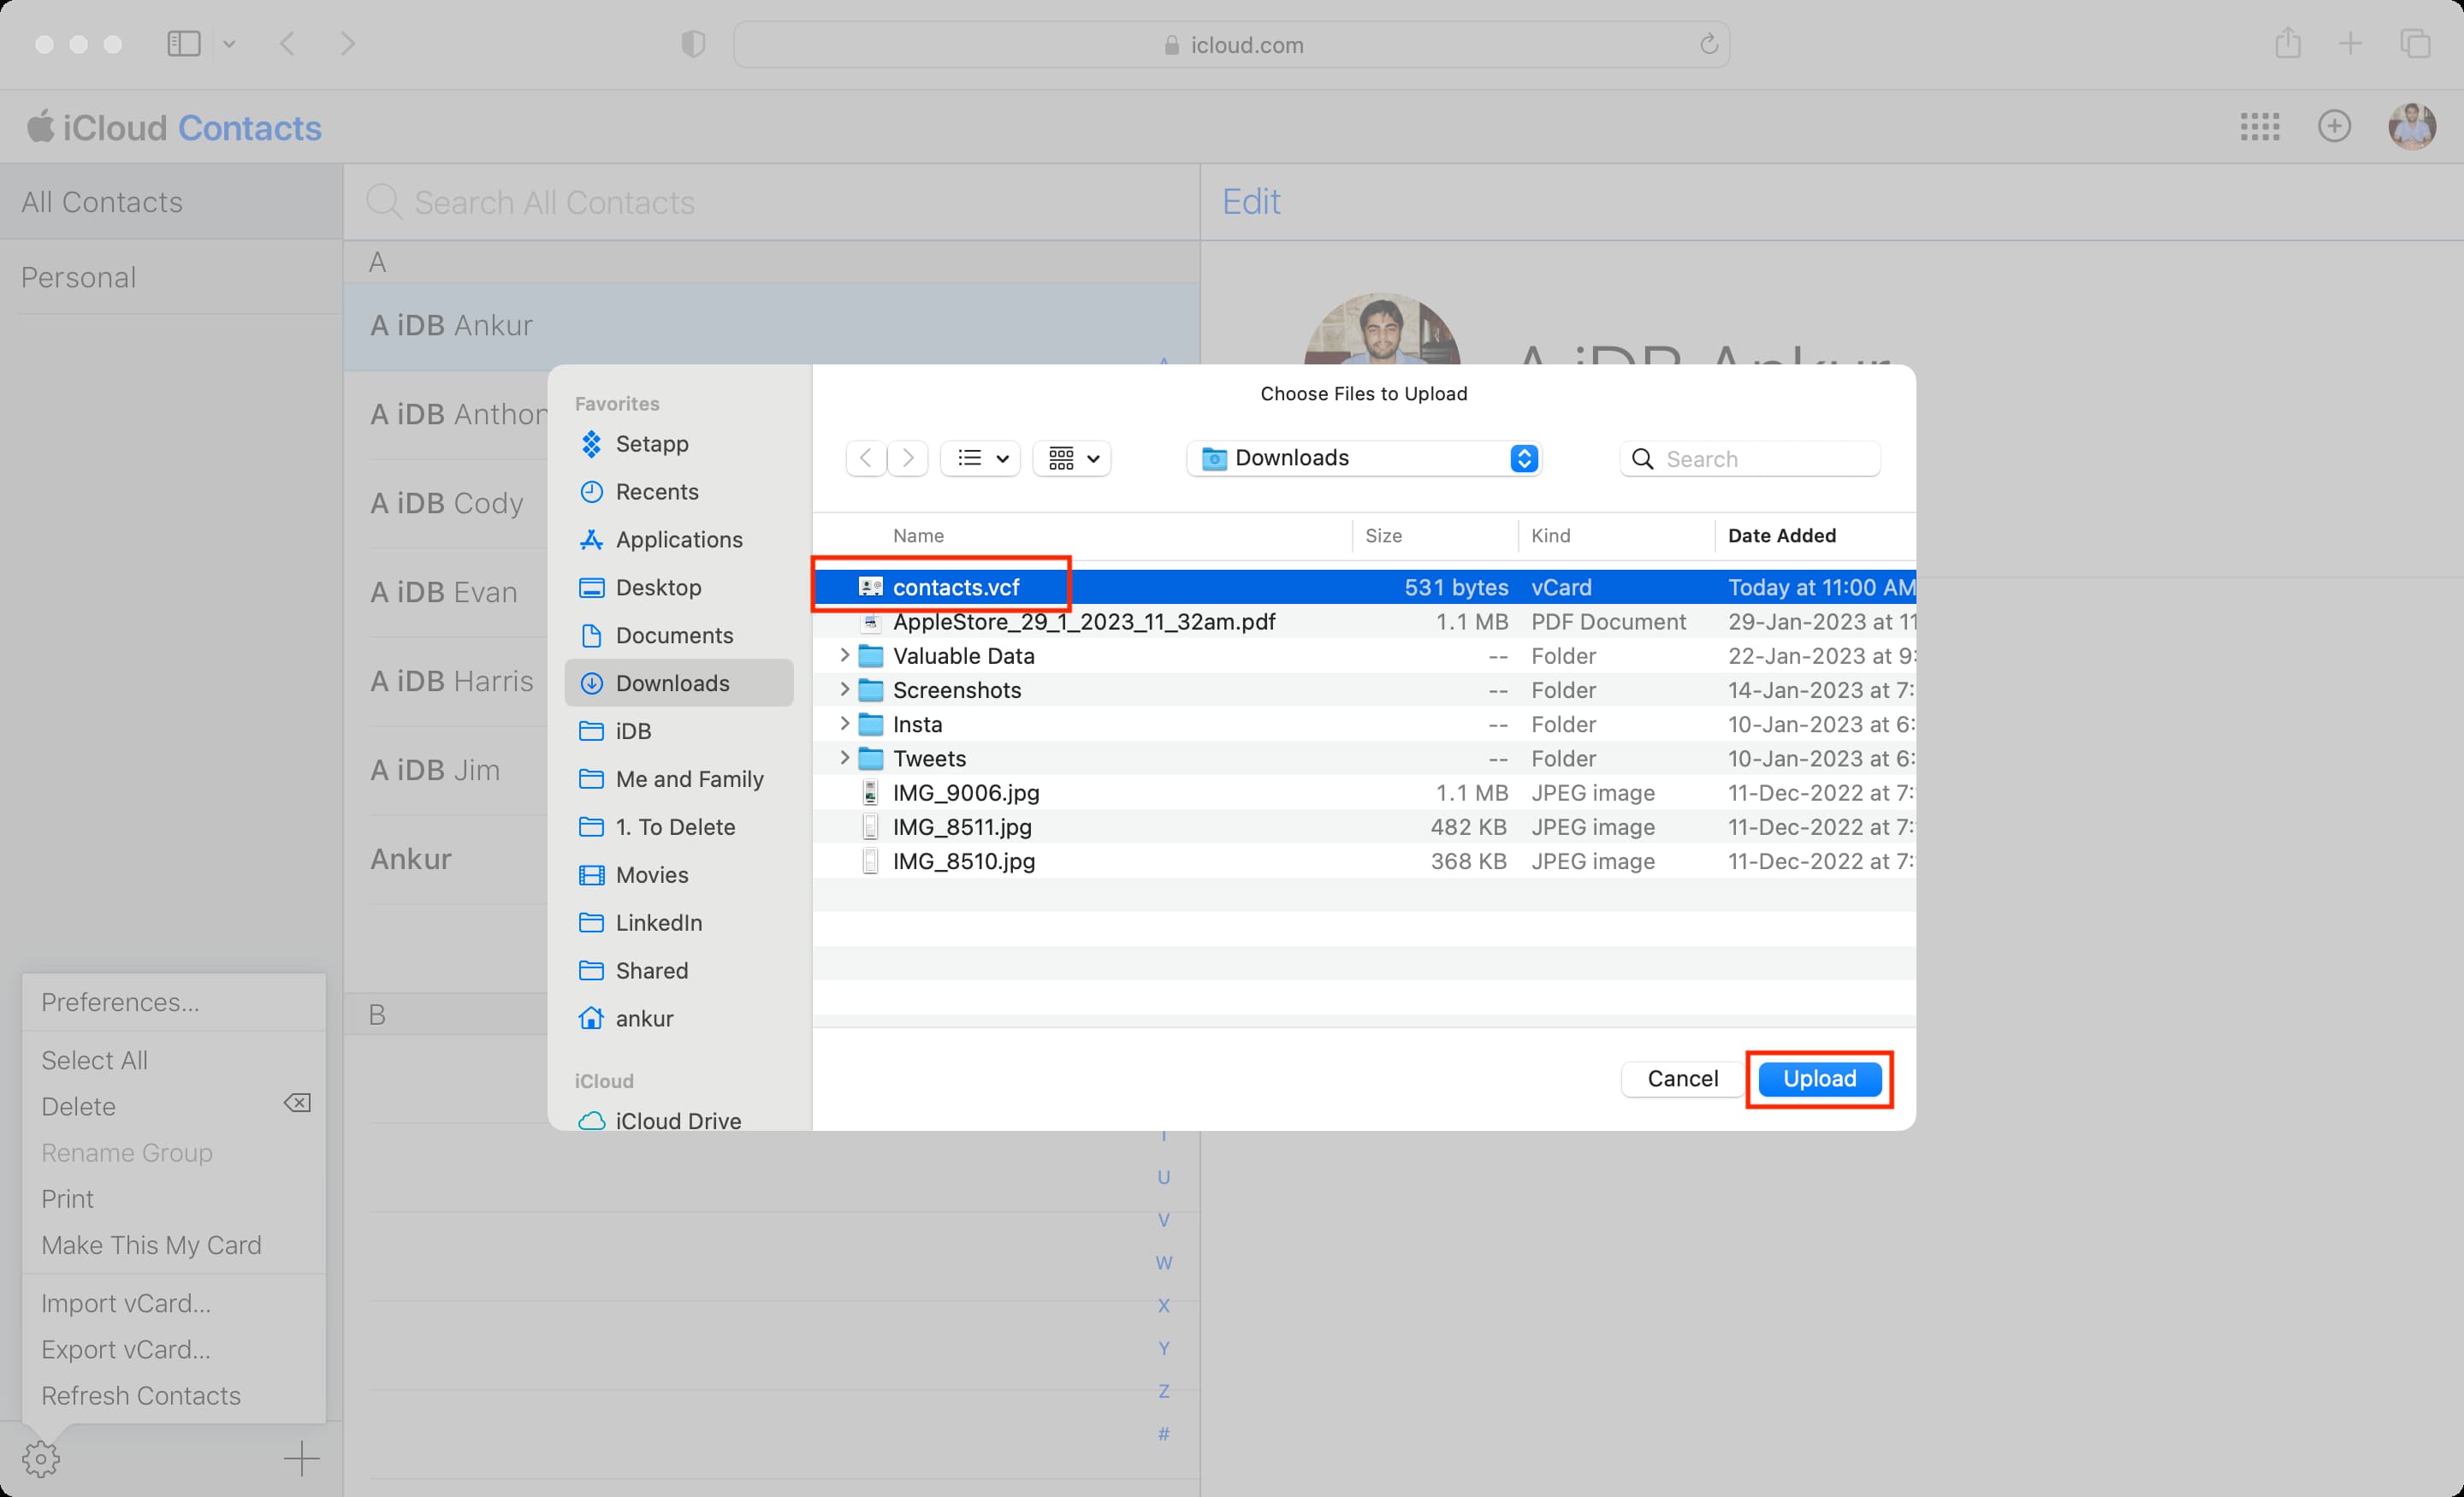 Select Google Contacts VCF file and upload it to iCloud Contacts